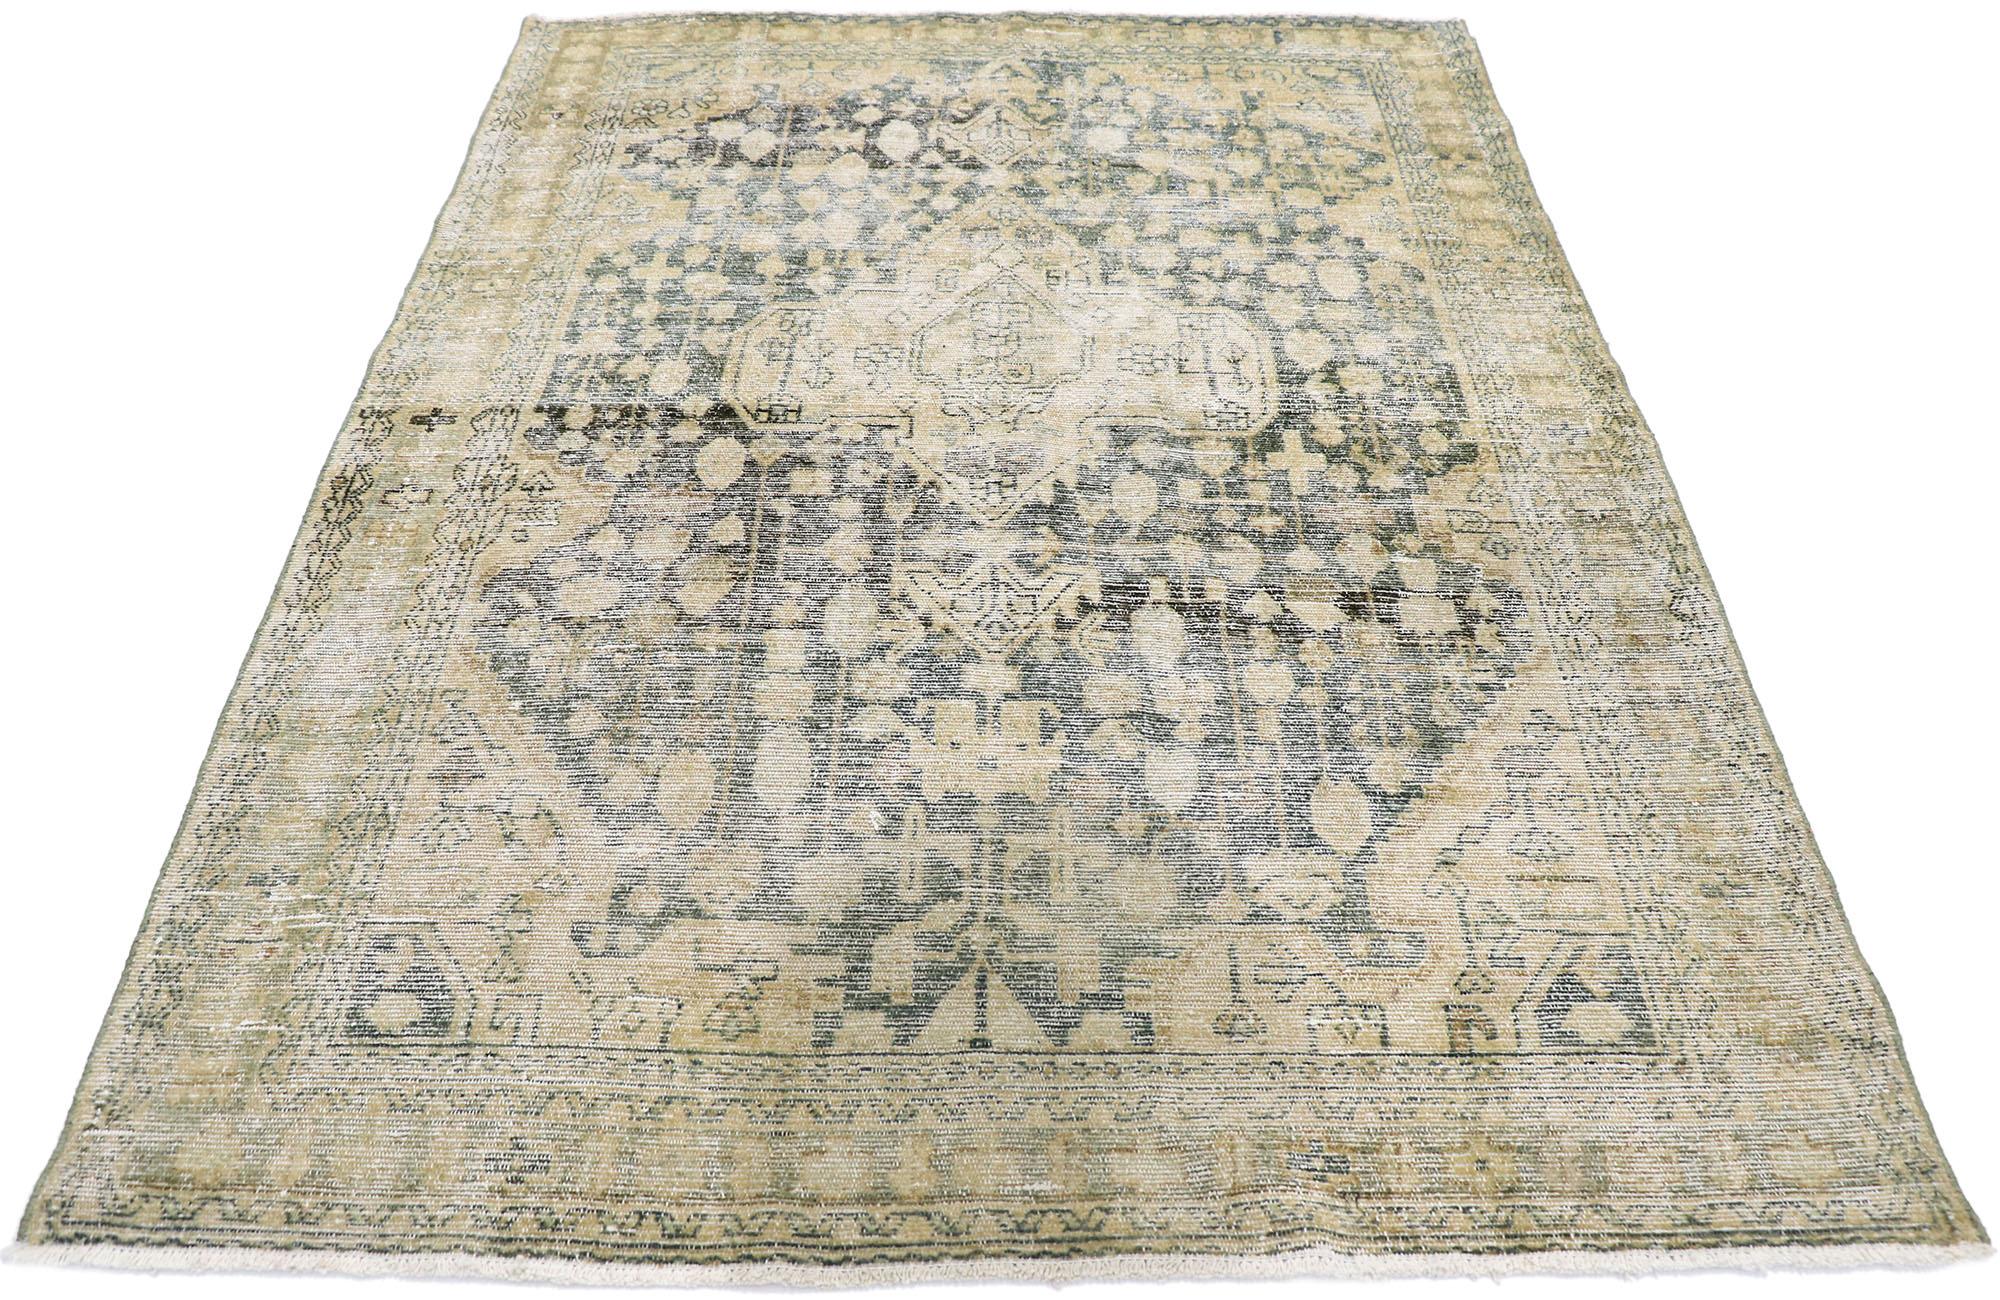 Malayer Distressed Antique Persian Mahal Rug with Rustic Gustavian Cottage Style